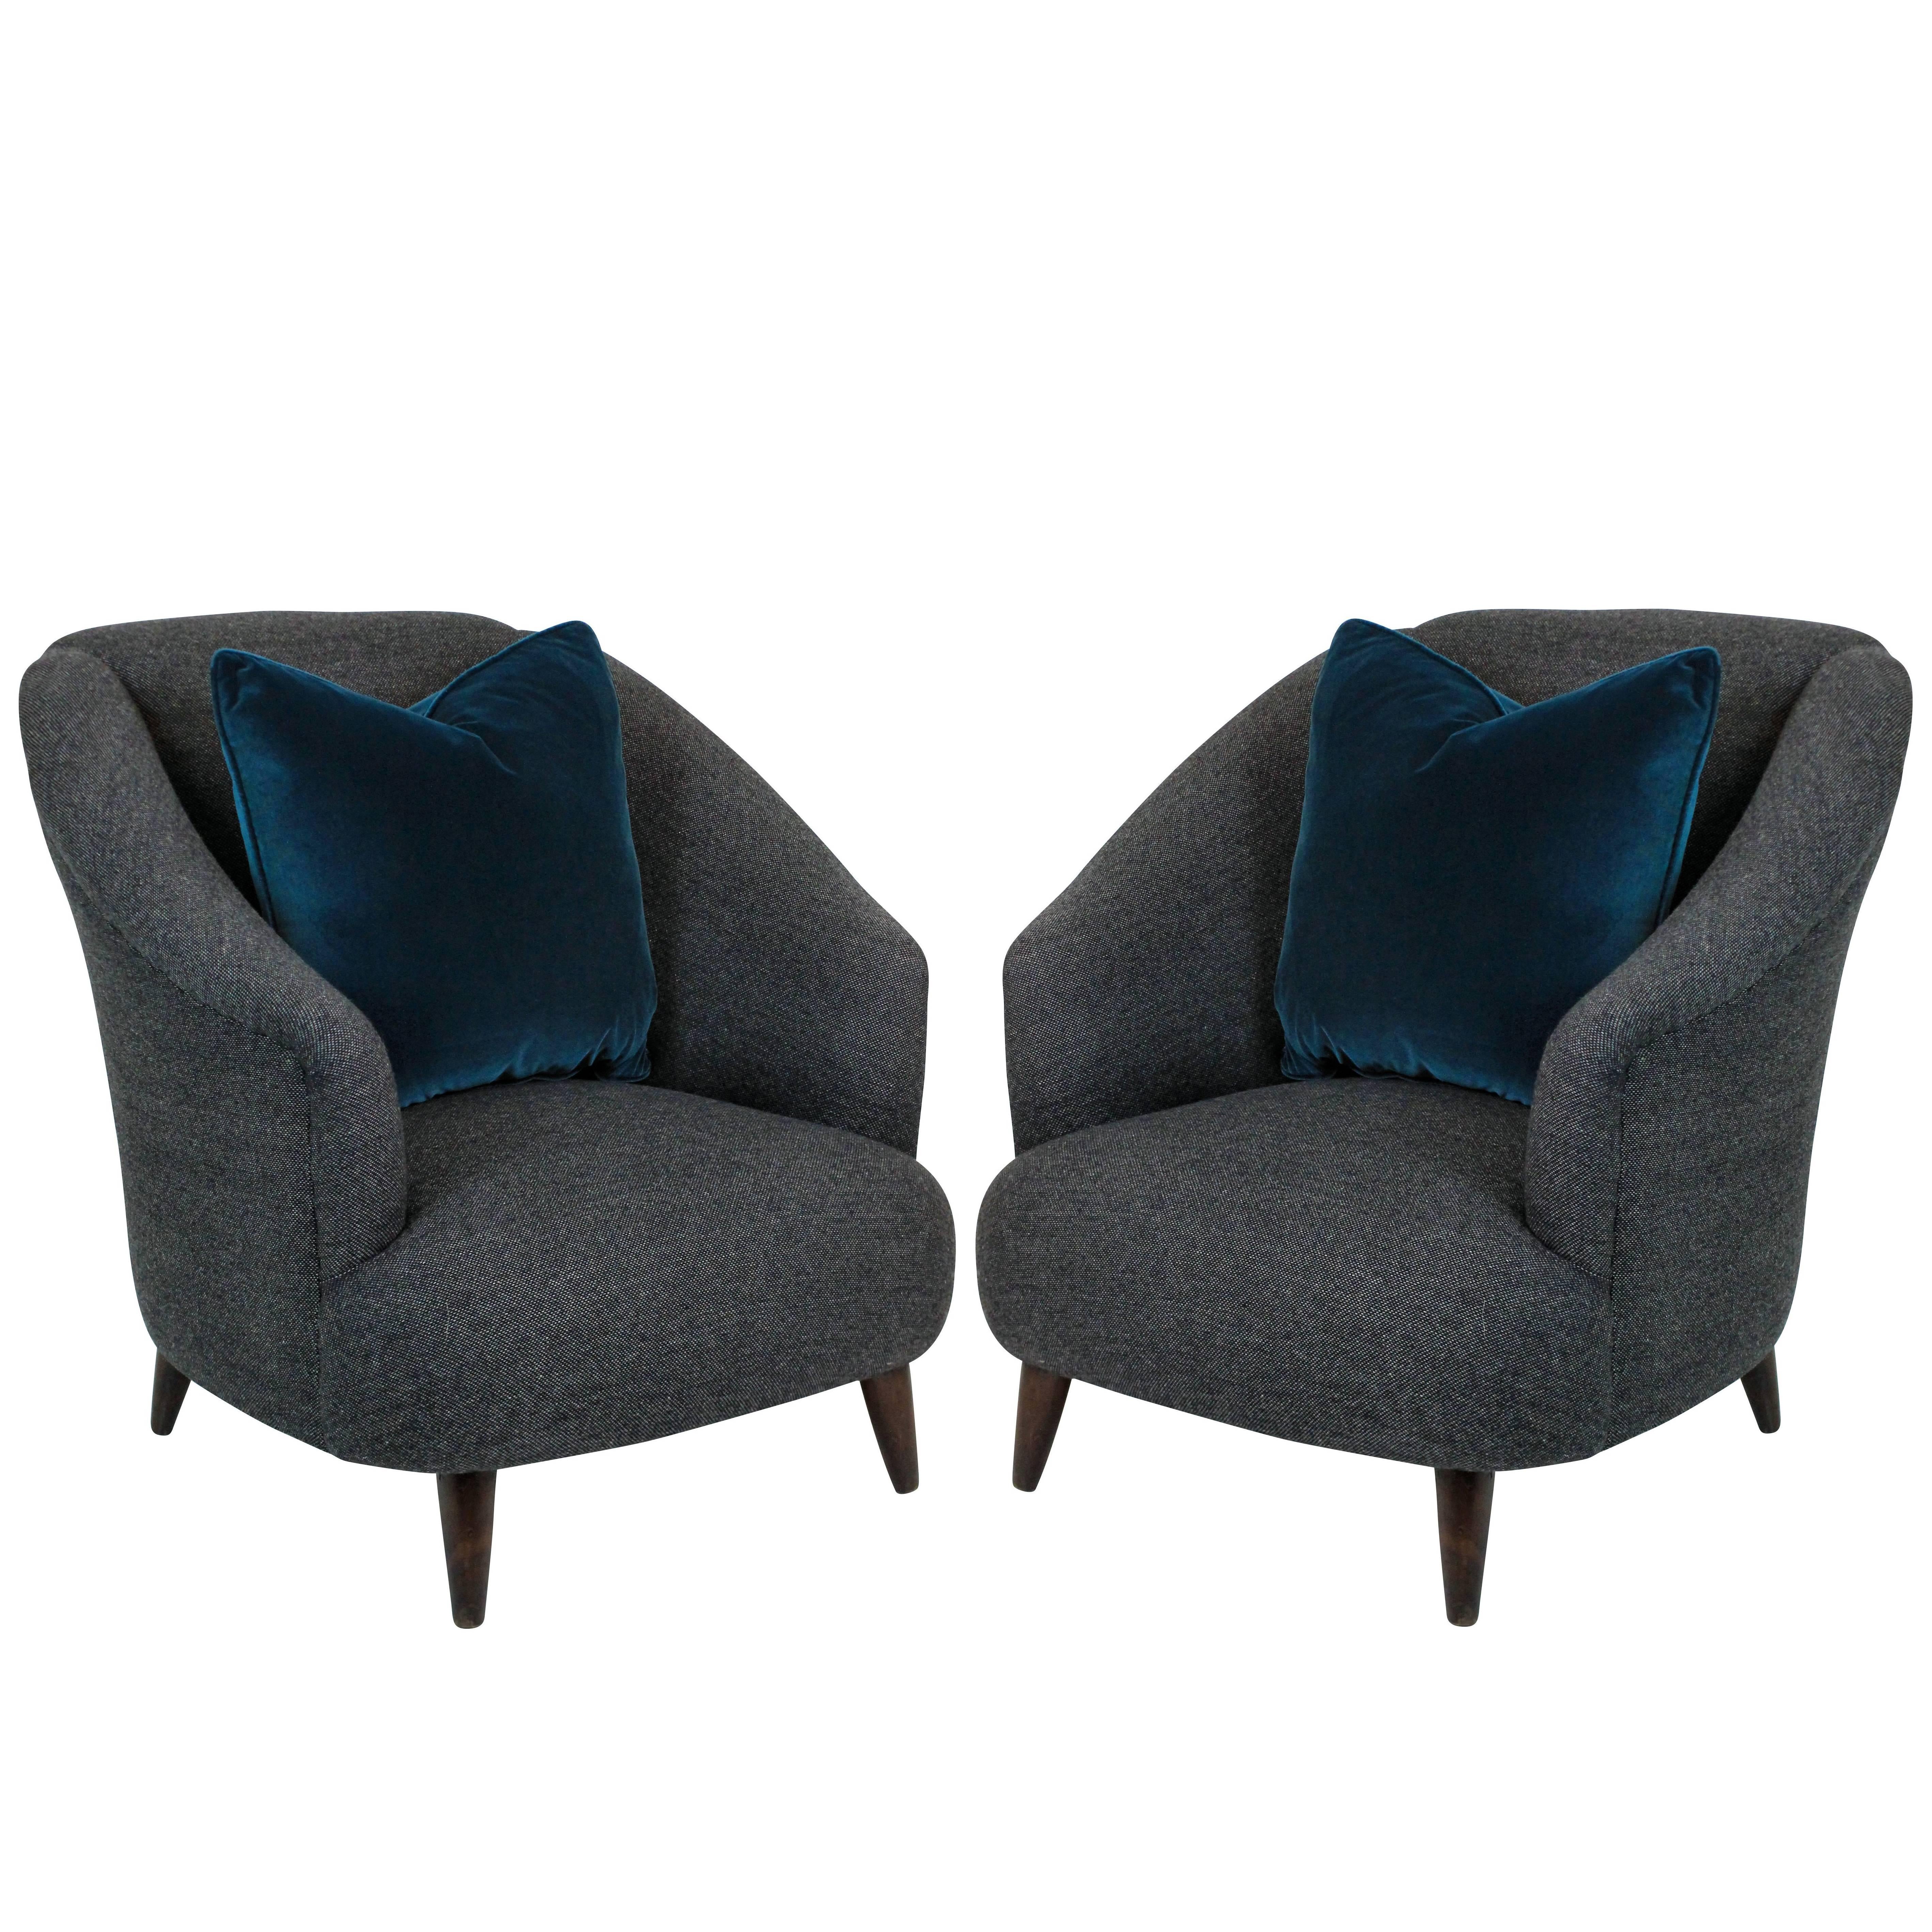 Pair of Ulrich Lounge Chairs